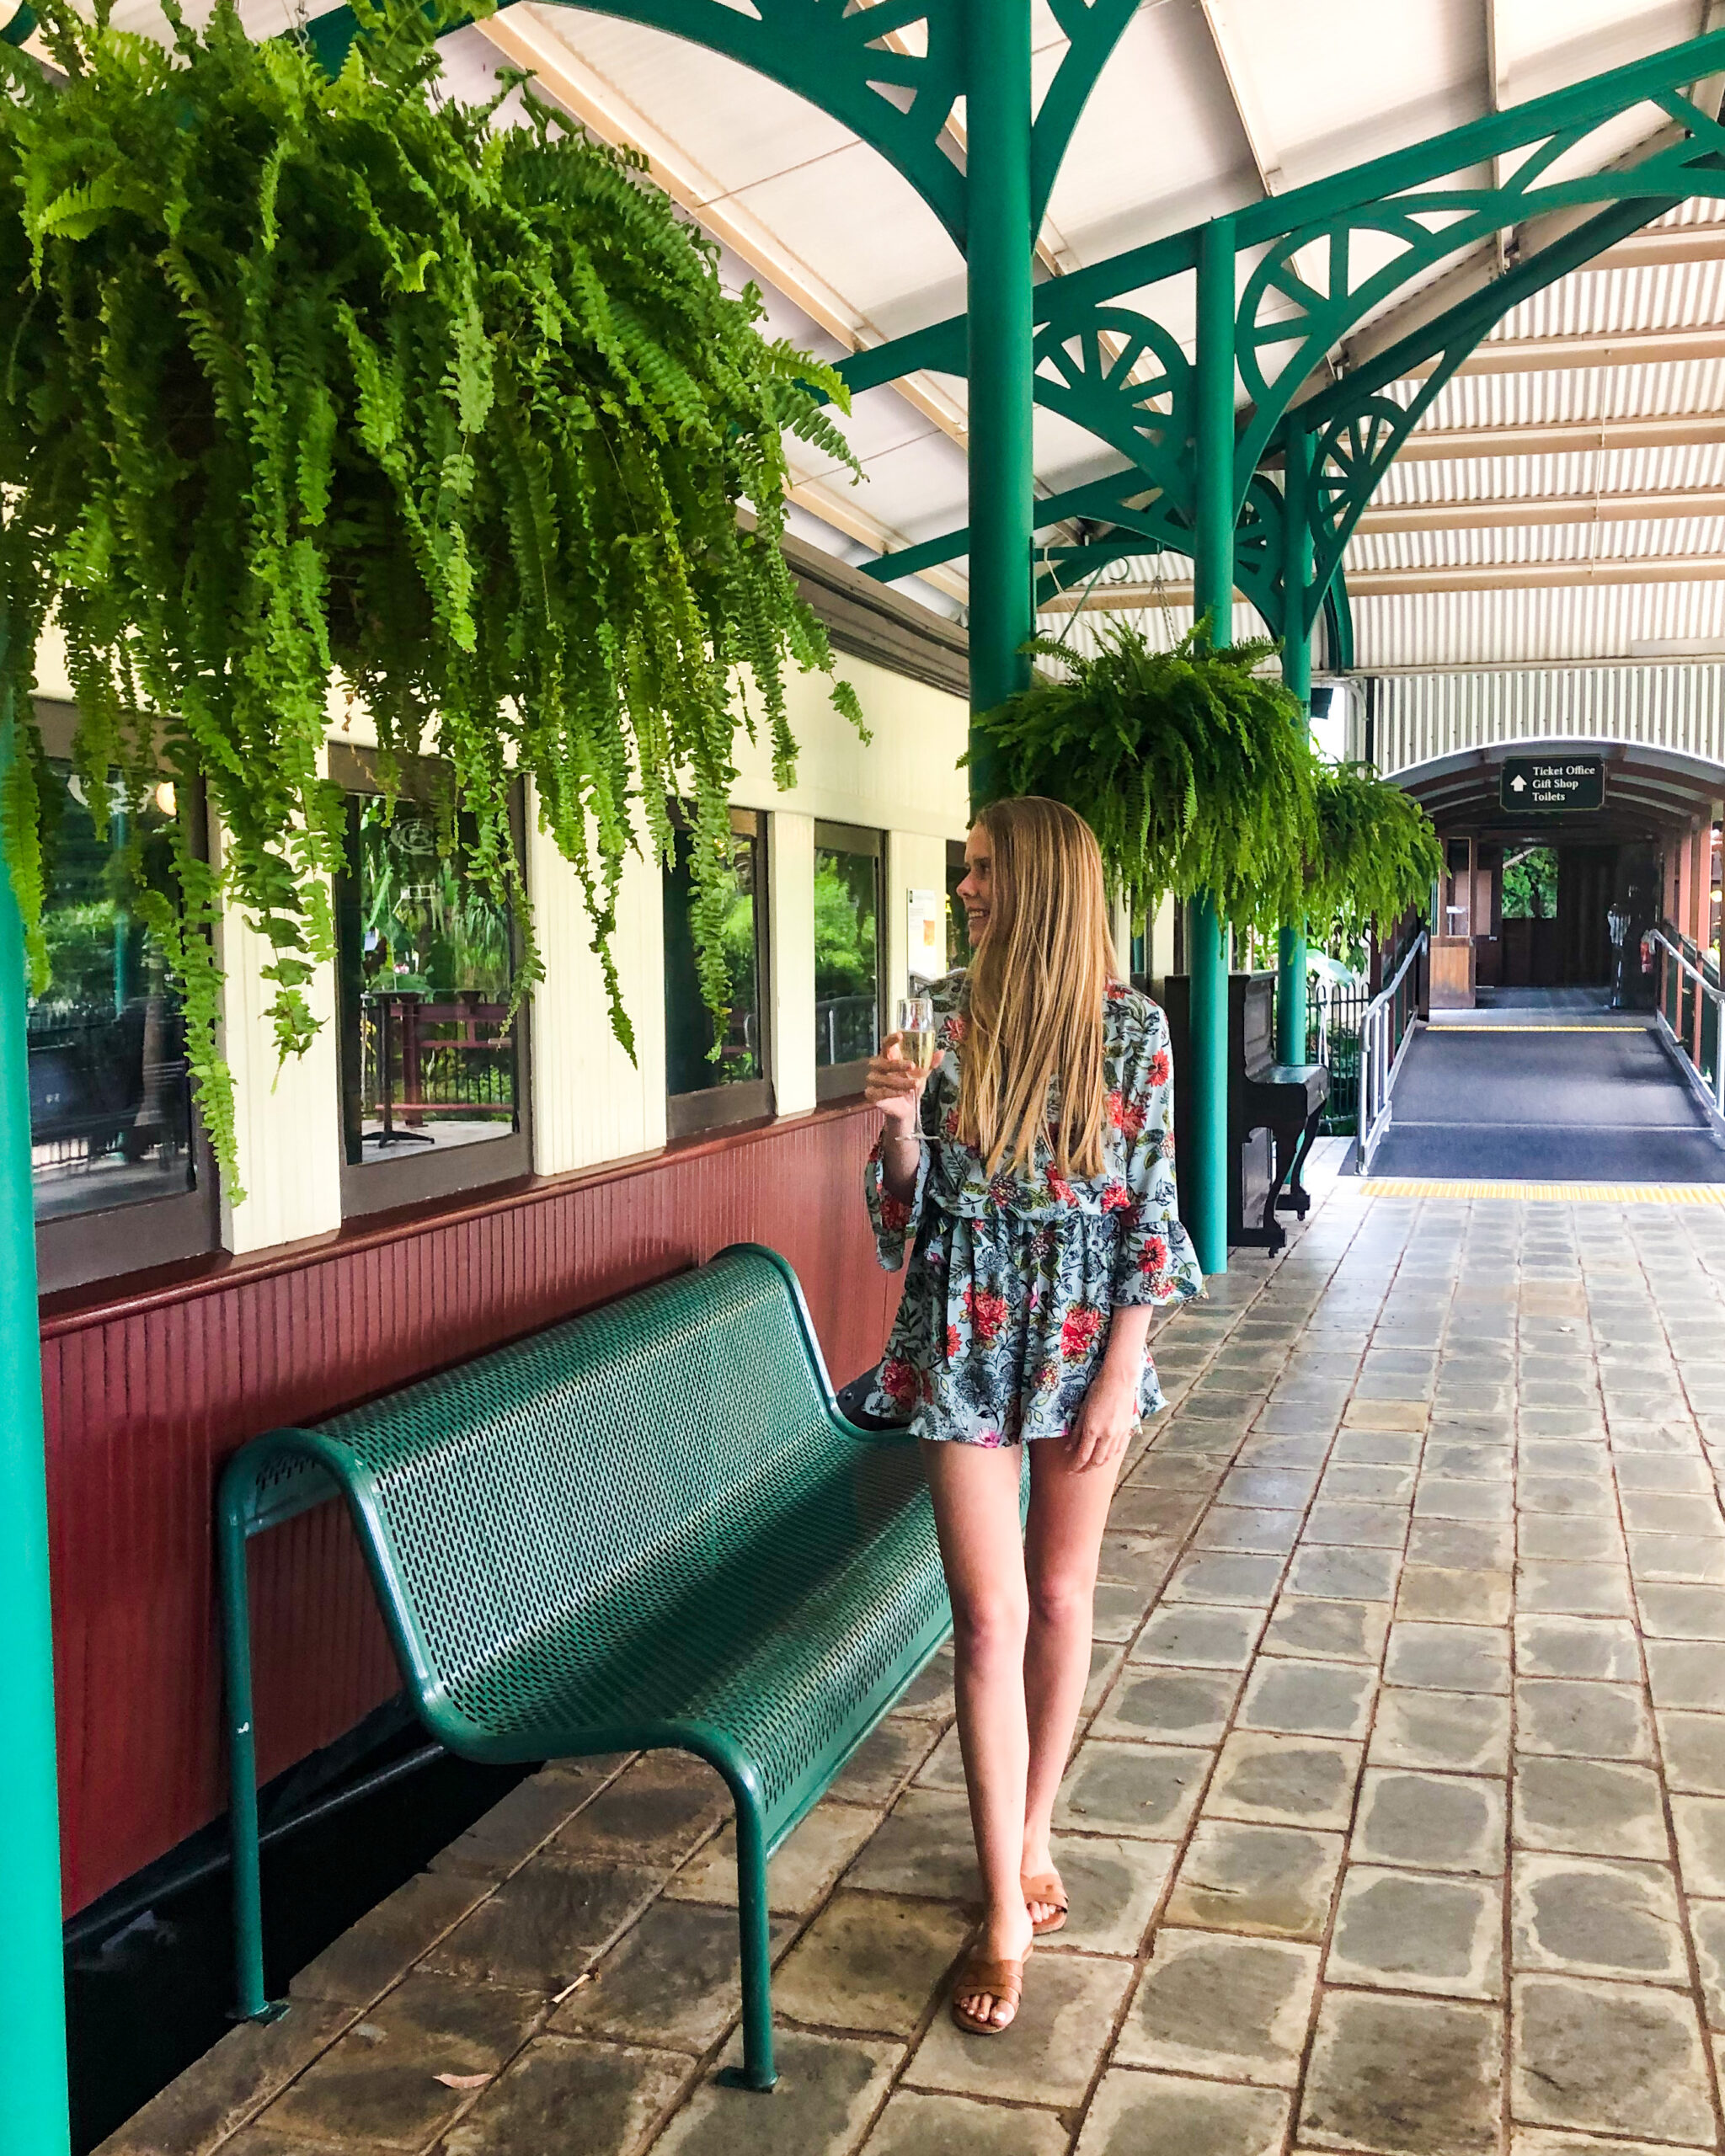 Girl standing holding champagne glass in front of train carriage at train station at the High Tea Trolley